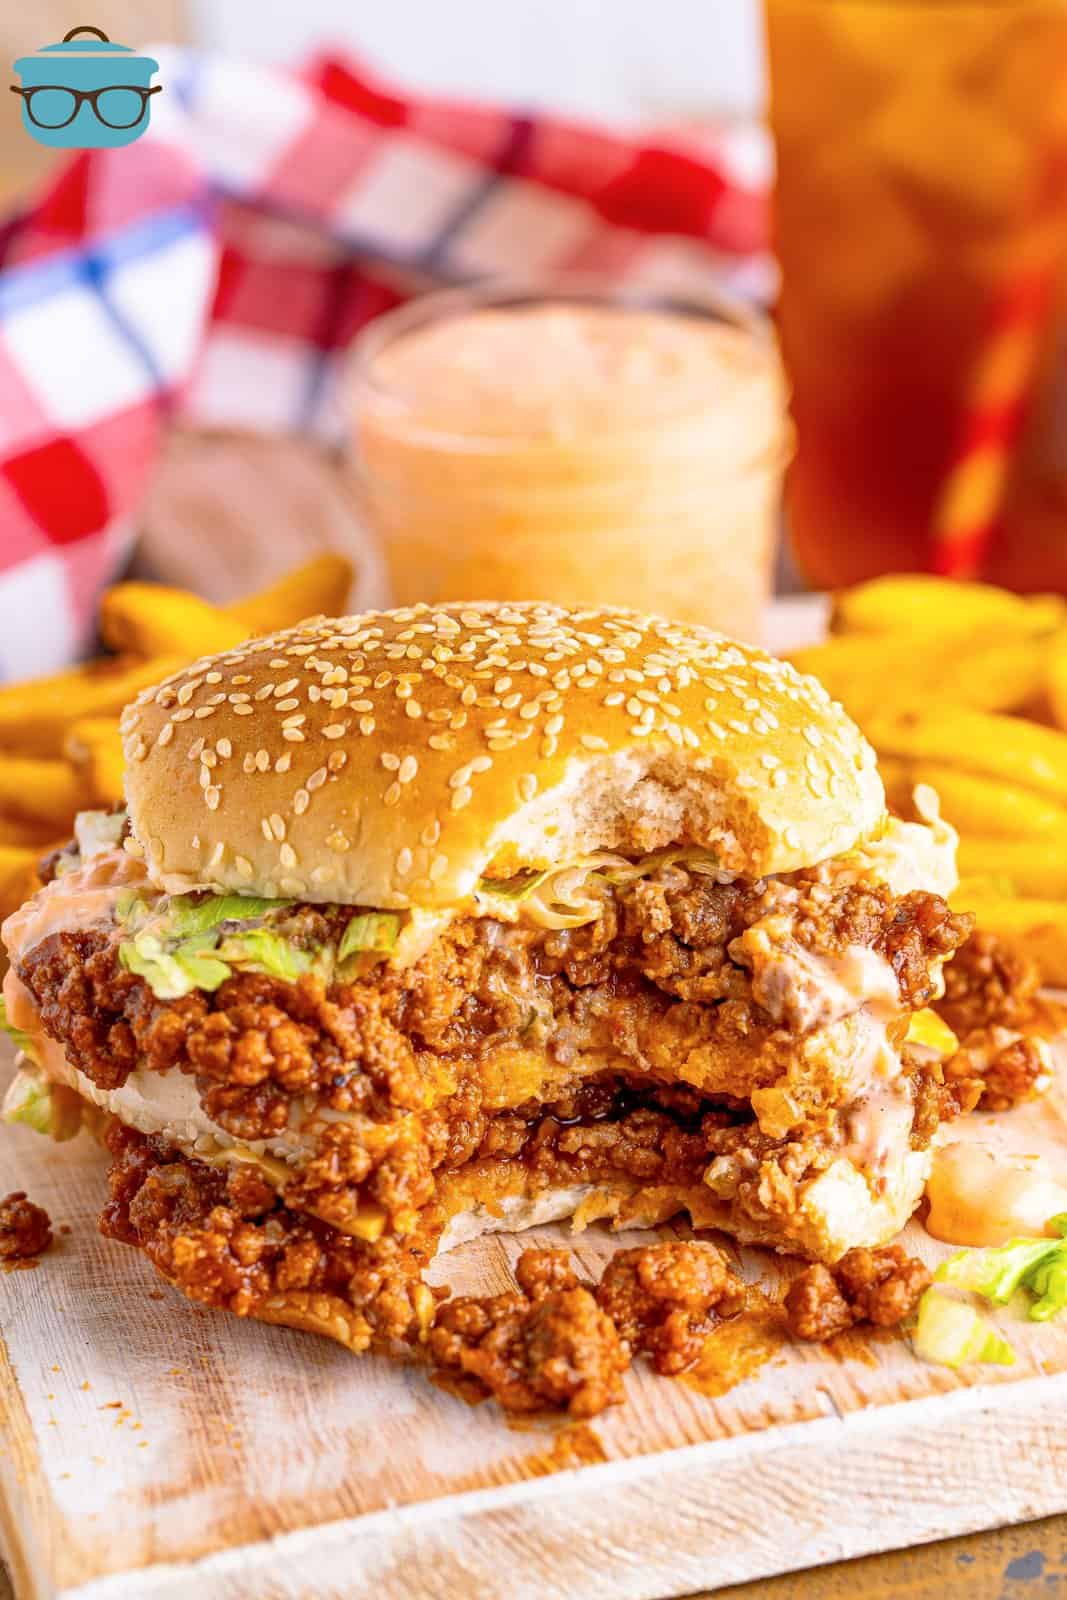 A Big Mac Sloppy Joe sandwich with a bite taken out and fries behind it.